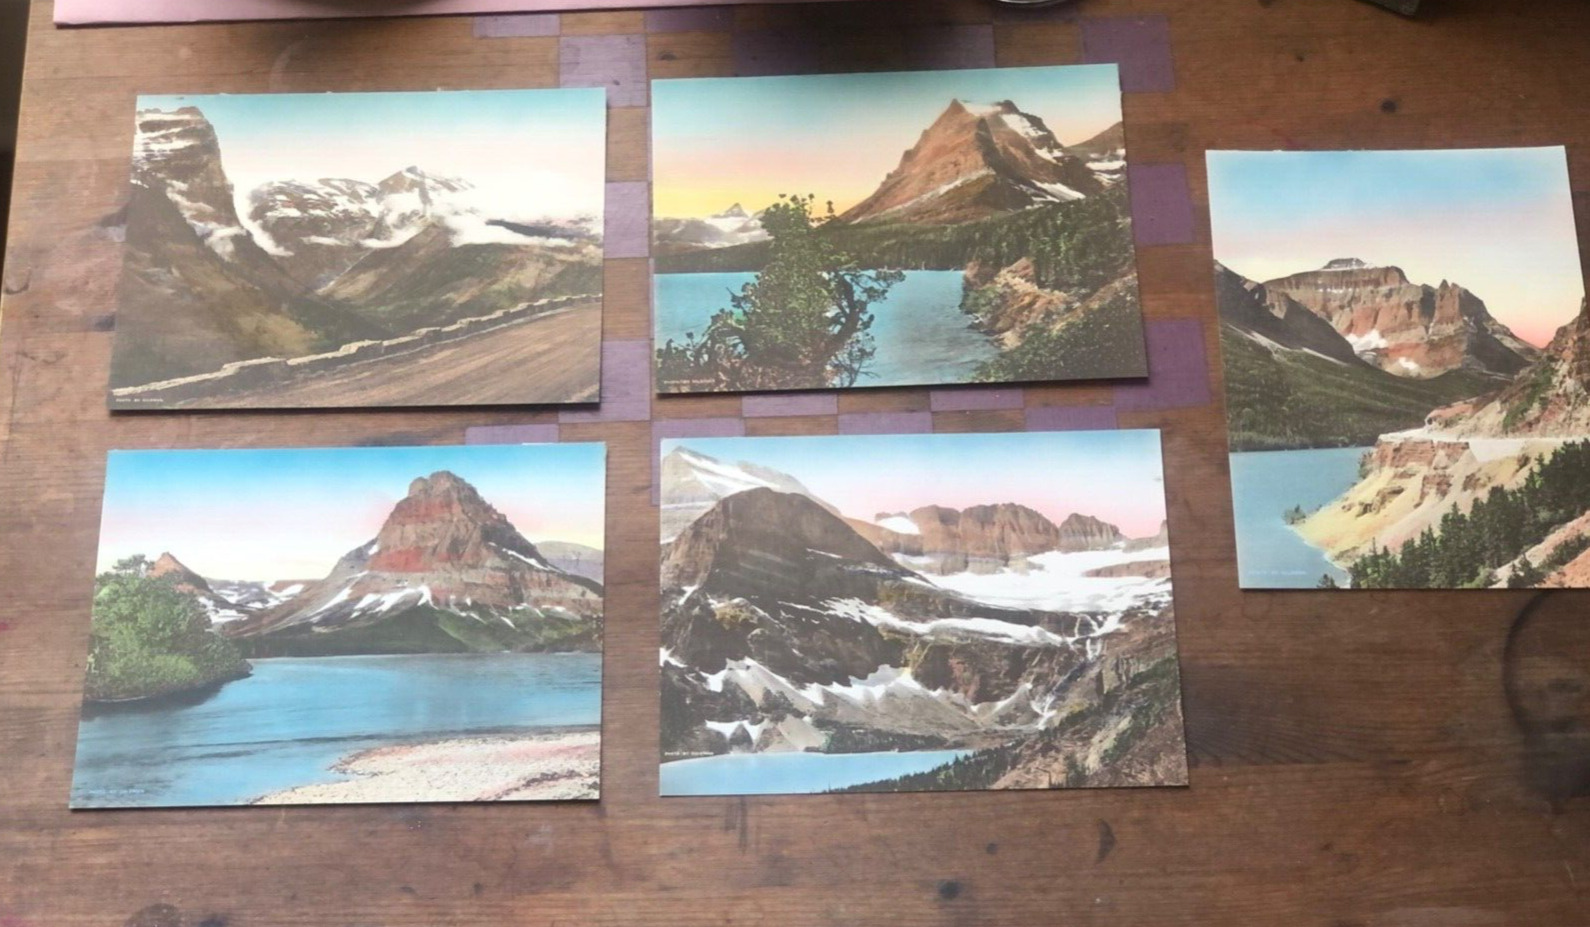 Lot of 5 Beautiful Vintage Tinted Print/Postcards of U.S. National Parks (6x8in)